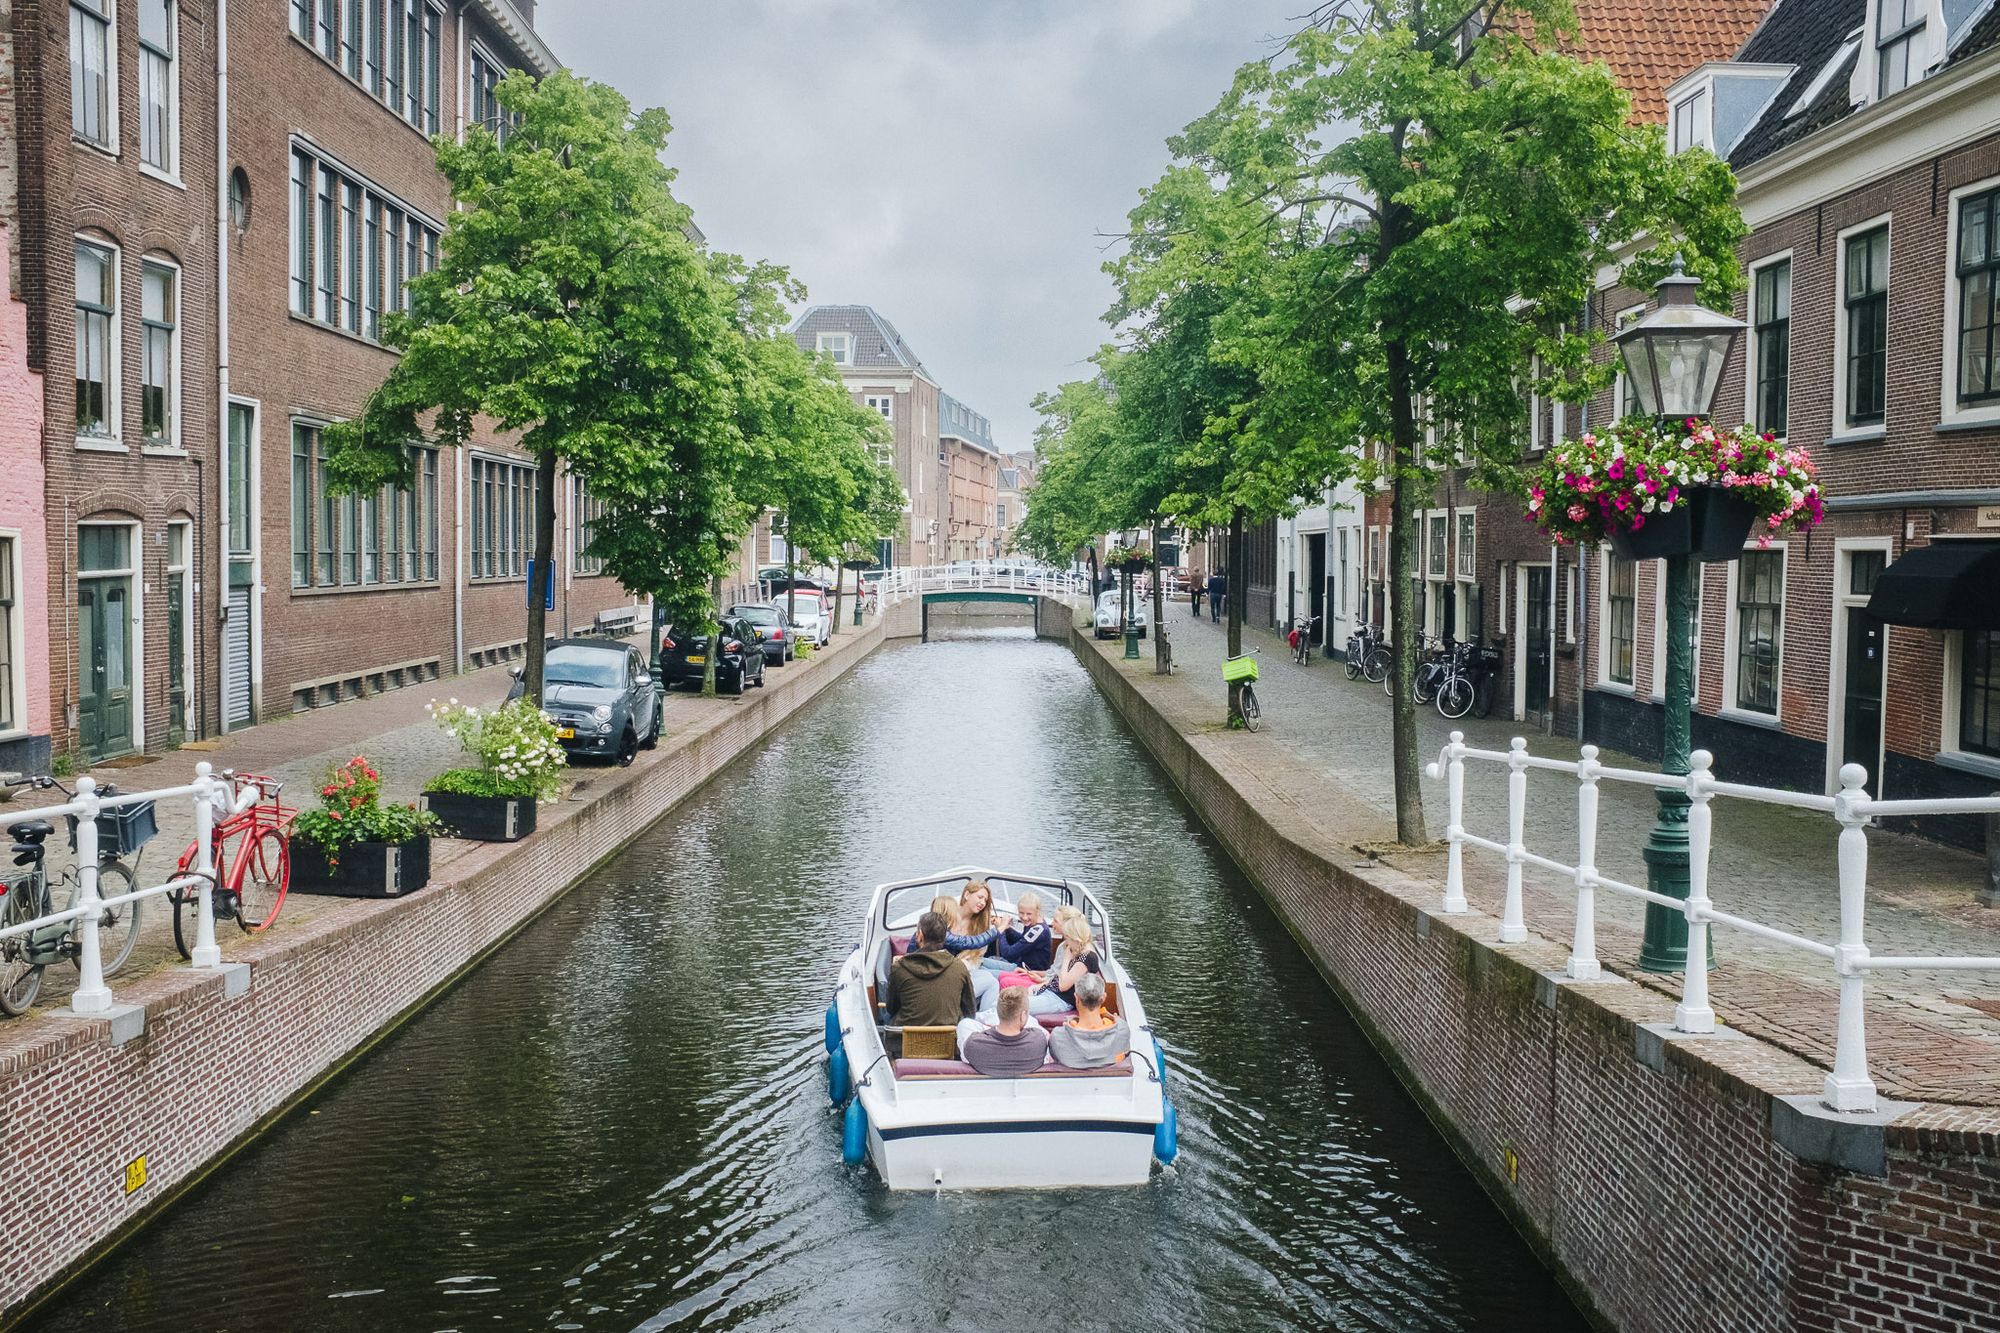 A family boat travels down a canal with trees lining and homes either side.